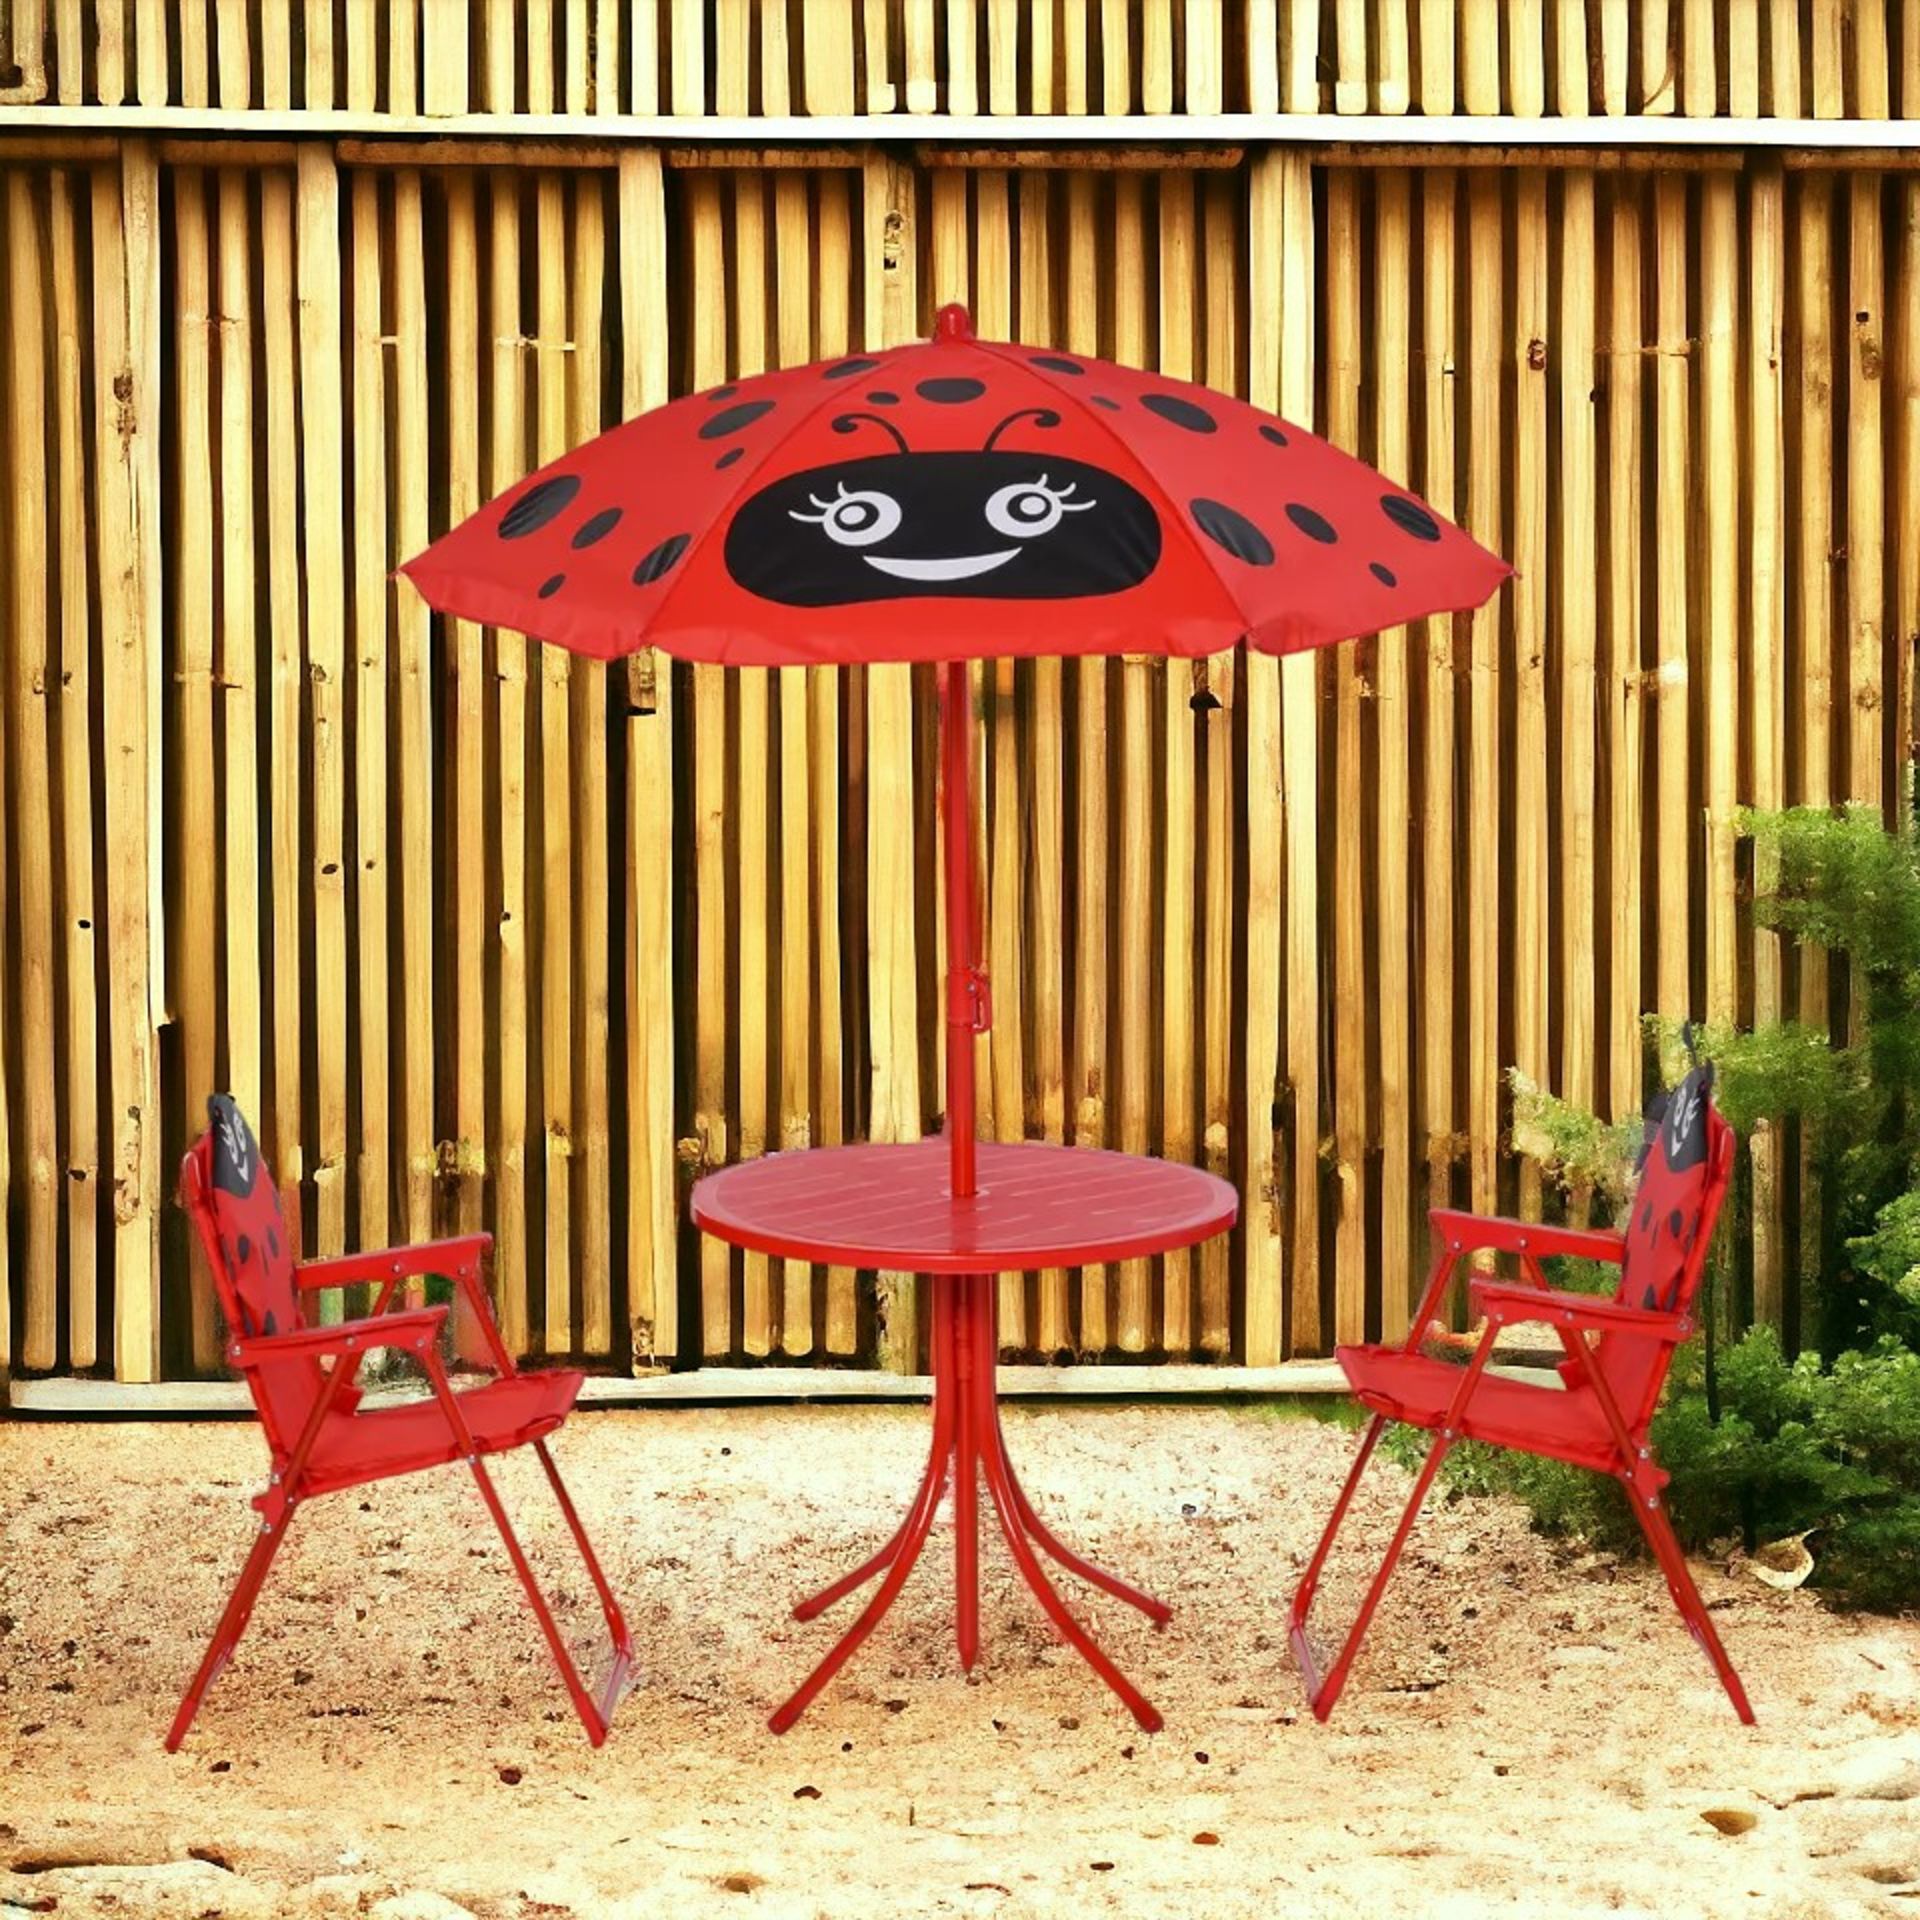 FREE DELIVERY - BRAND NEW KIDS FOLDING PICNIC TABLE CHAIR SET LADYBUG PATTERN OUTDOOR - Image 2 of 2